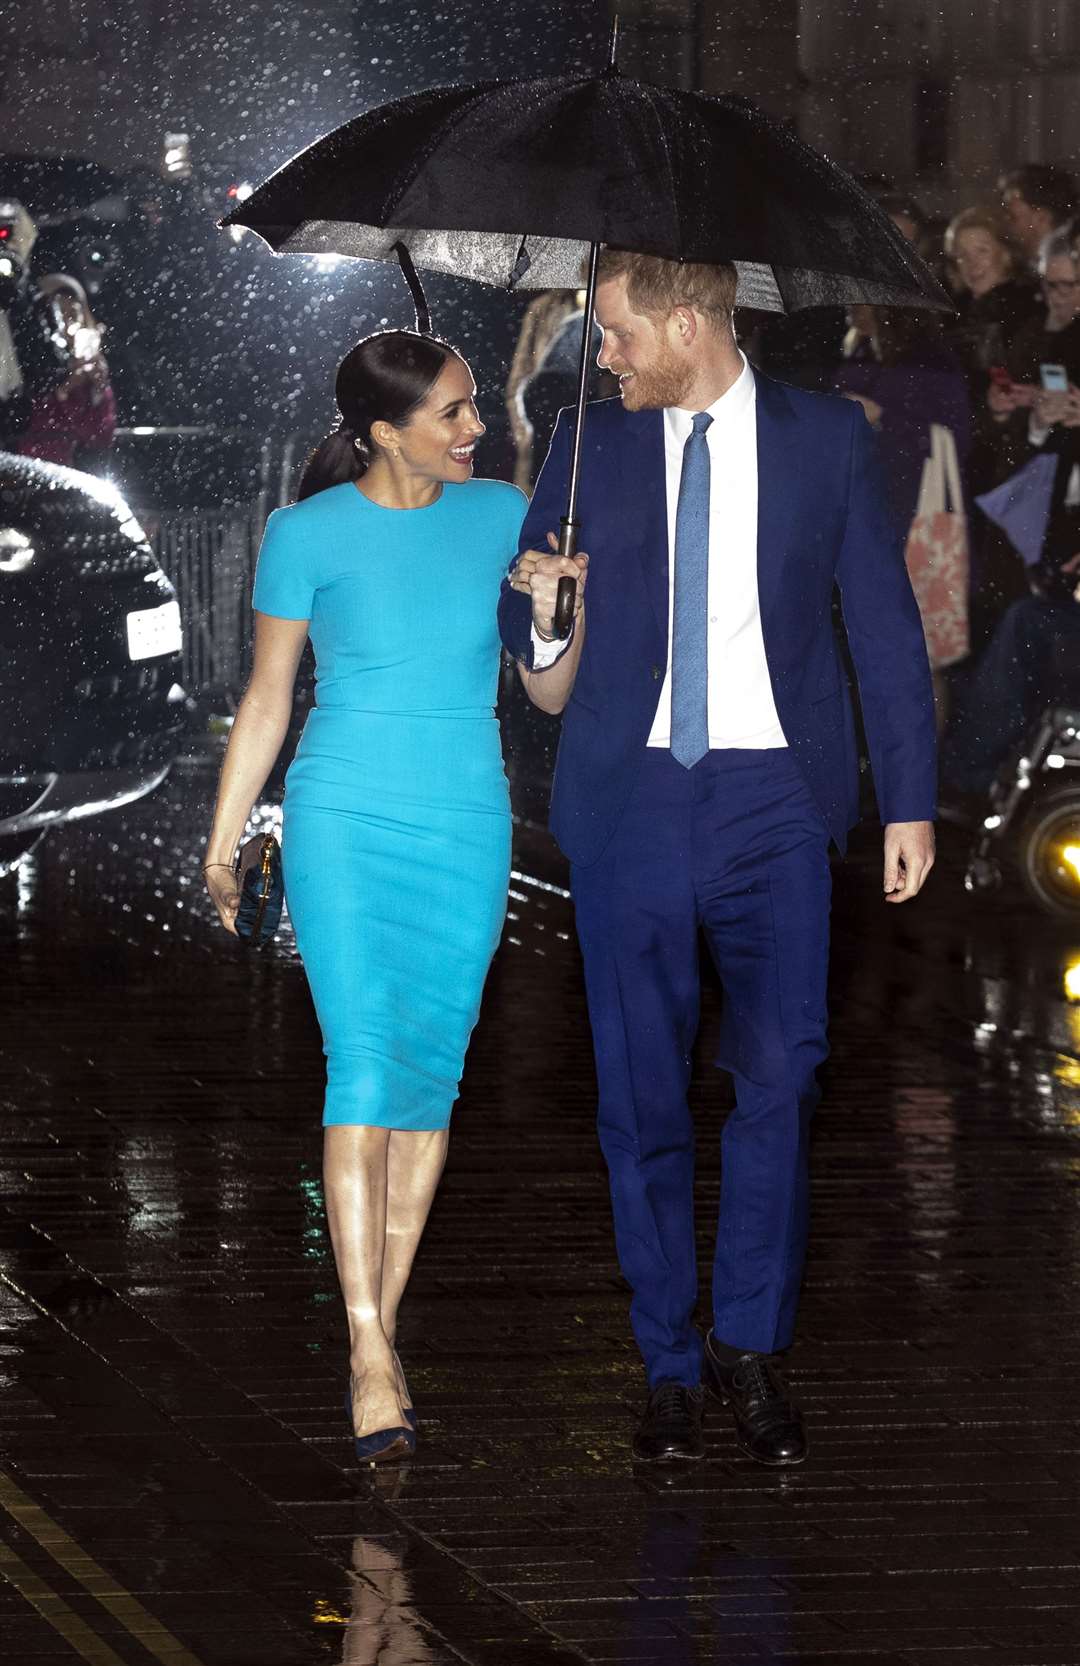 The Duke and Duchess of Sussex arrive at the Endeavour Fund Awards – one of their final royal engagements (Steve Parsons/PA)